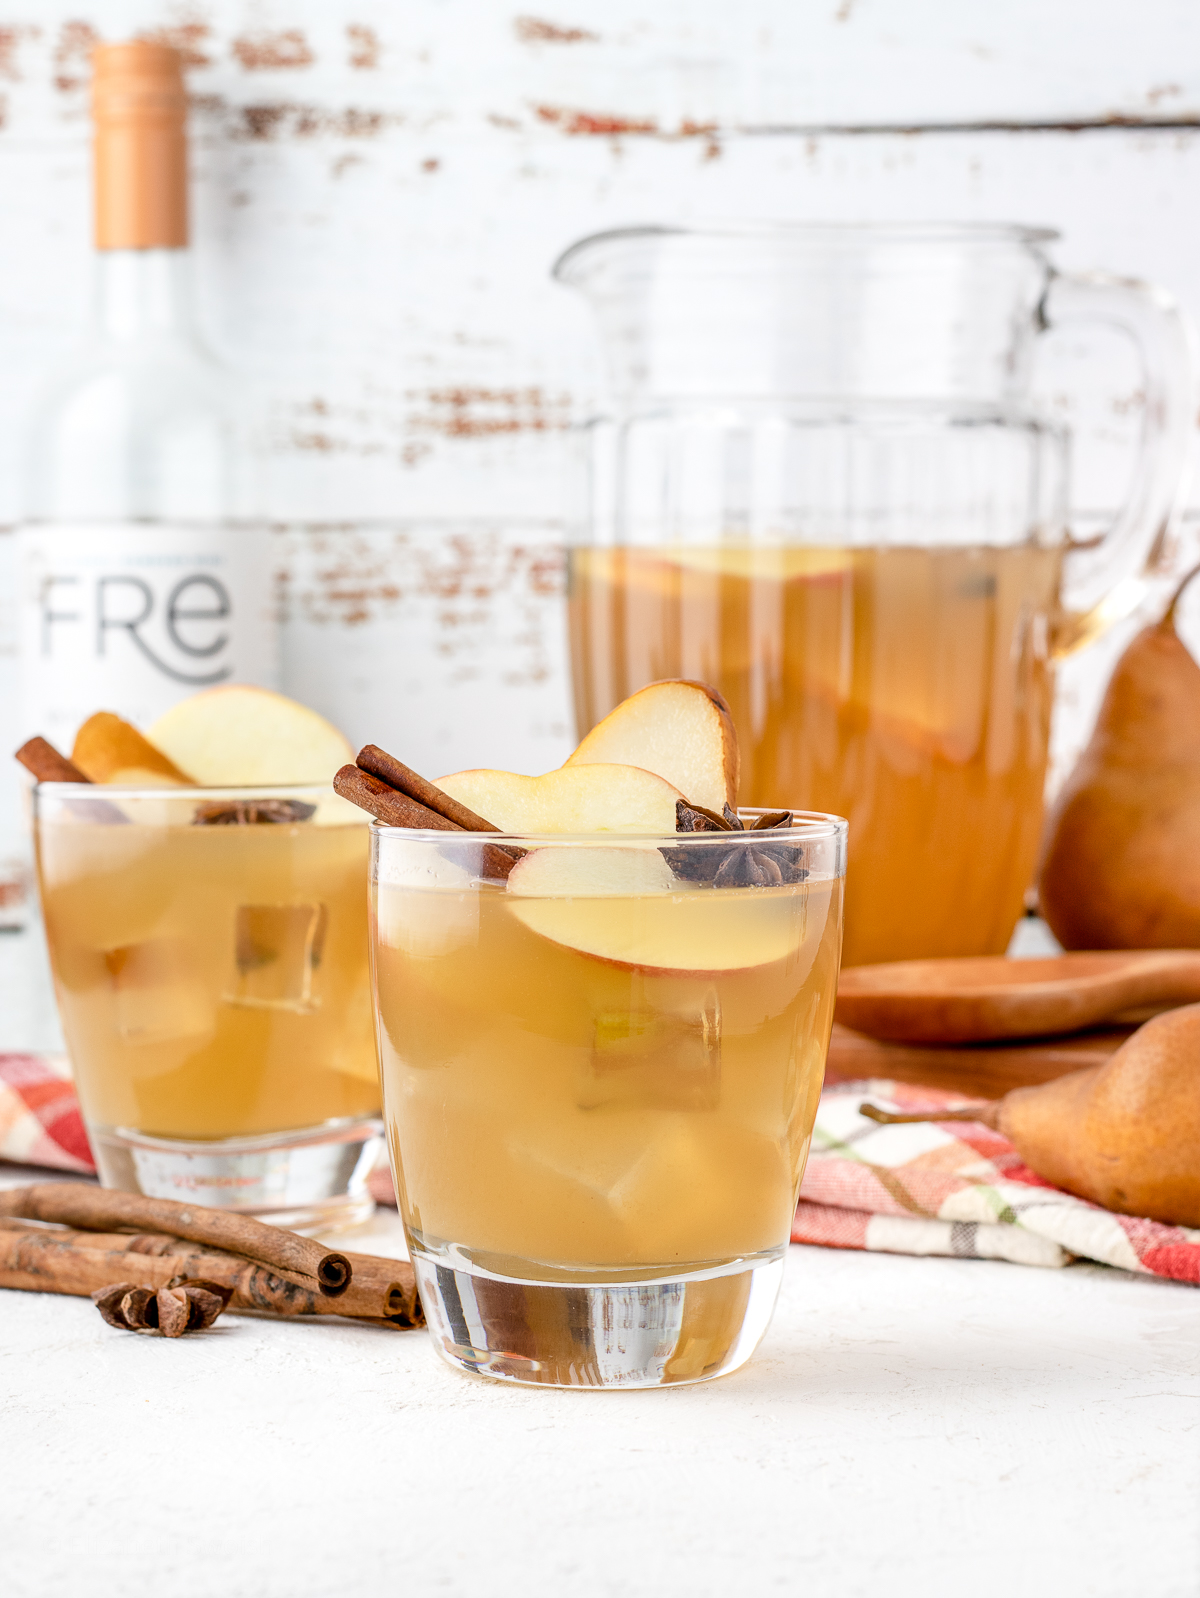 Scene of pitcher of Apple Cider Sangria Mocktails with two full glasses of it and a bottle of alcohol removed Moscato. Decorated with pears, apples, cinnamon sticks, and star anise.